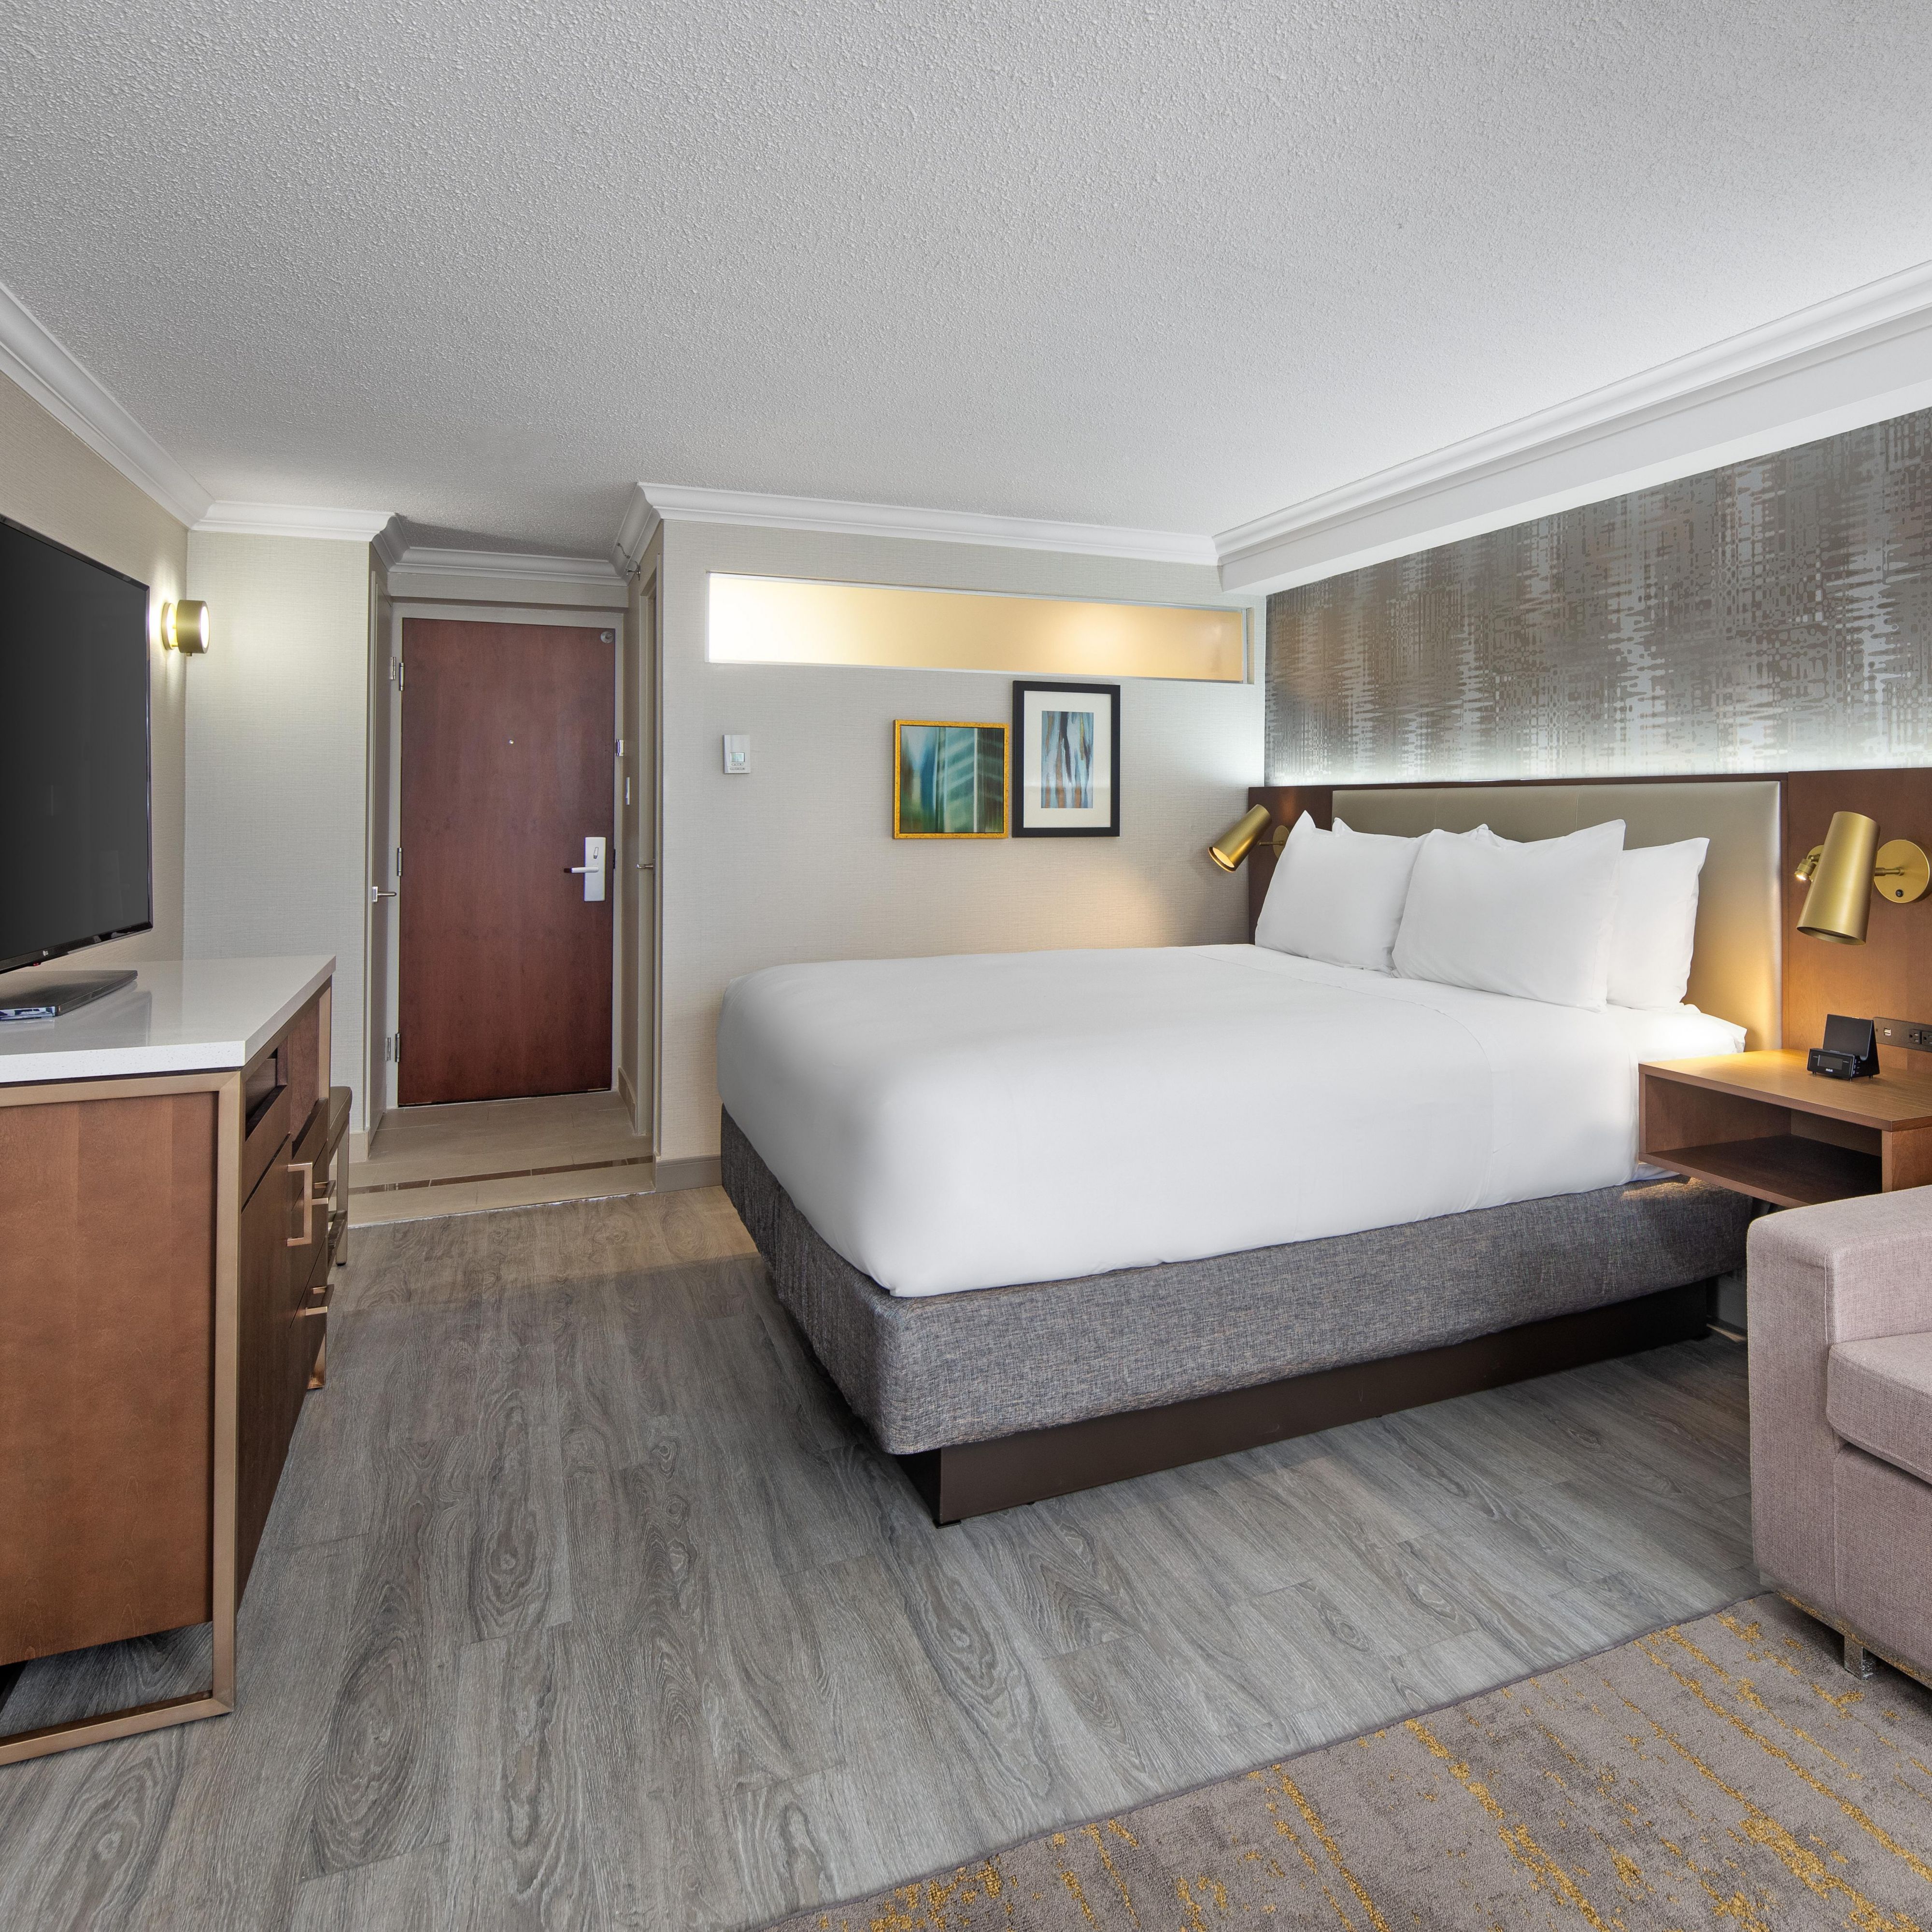 King Executive Guest Room - Your comfort is our first priority.